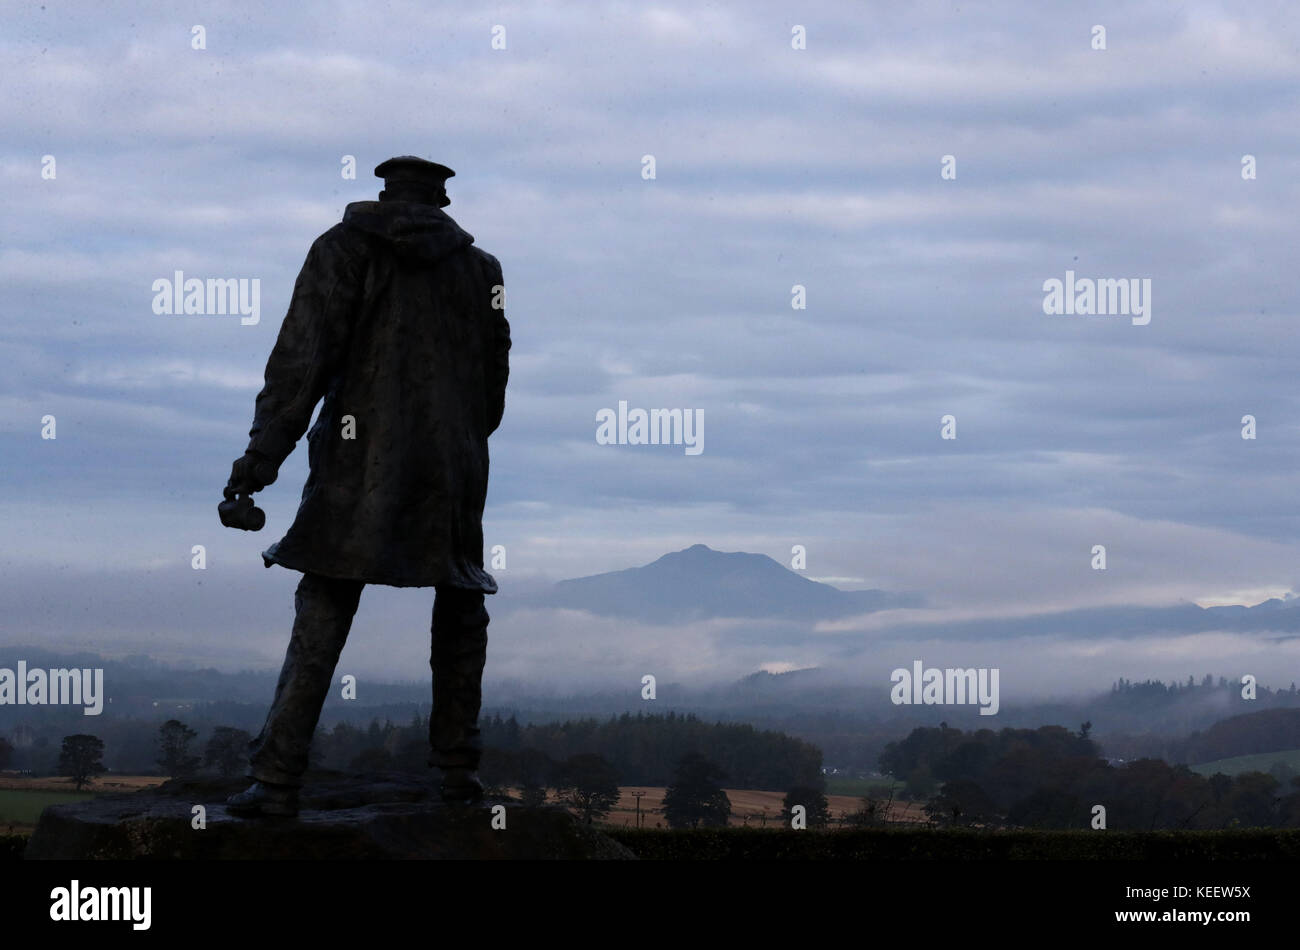 The statue of David Stirling, founder of the SAS, looks over mist around Ben Ledi mountain in the Perthshire hills near Doune, Central Scotland, as the UK is braced for a night of heavy rain and winds before Storm Brian batters the country this weekend. Stock Photo